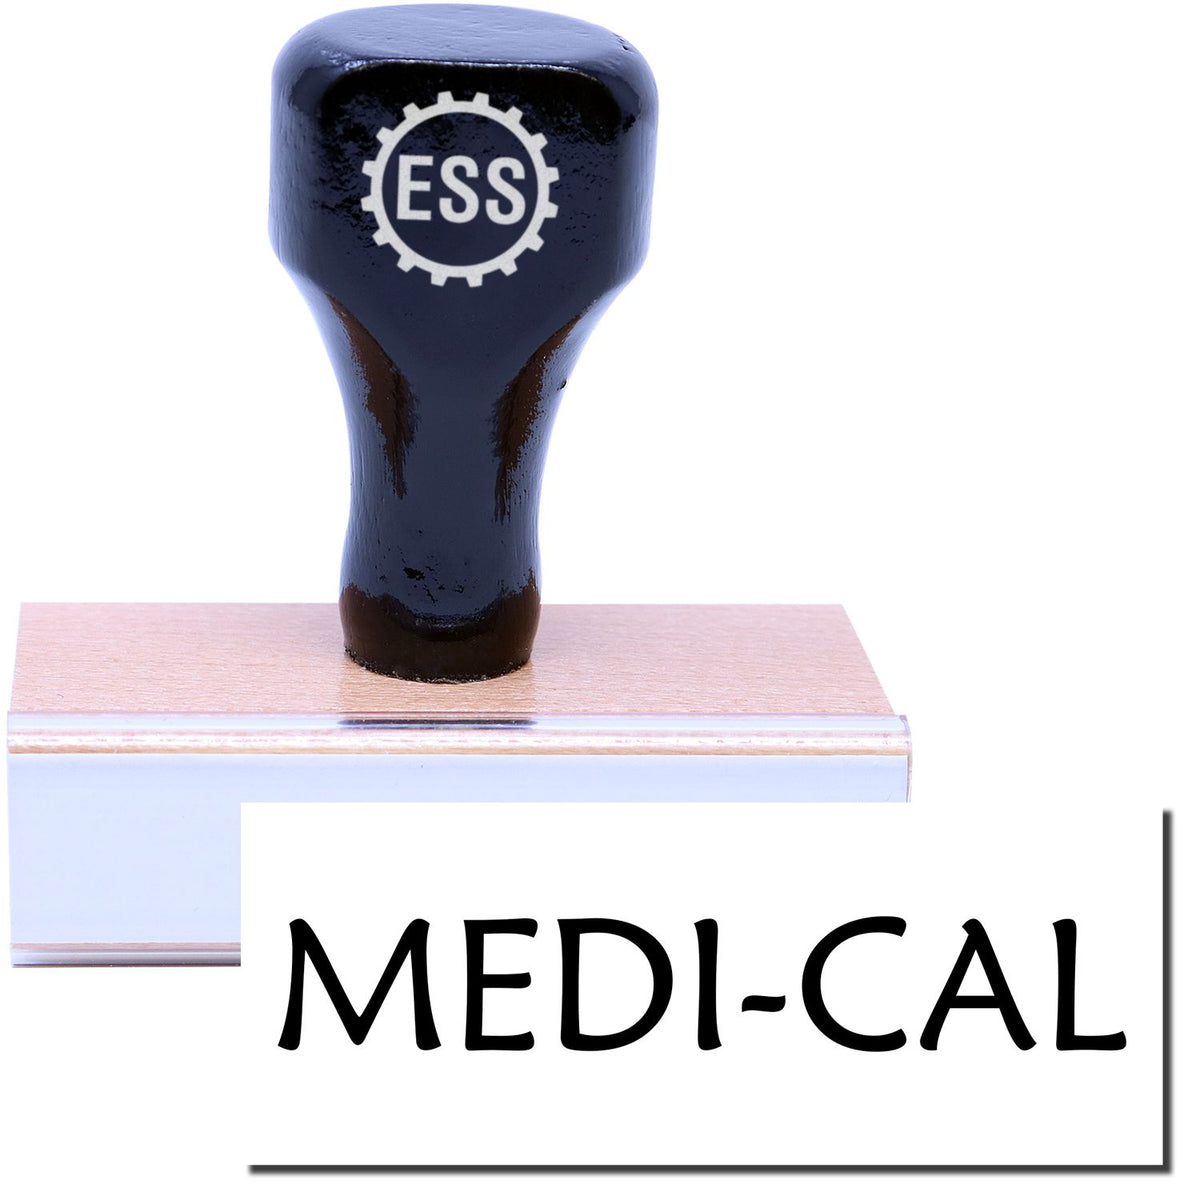 A stock office rubber stamp with a stamped image showing how the text &quot;MEDI-CAL&quot; in a large font is displayed after stamping.